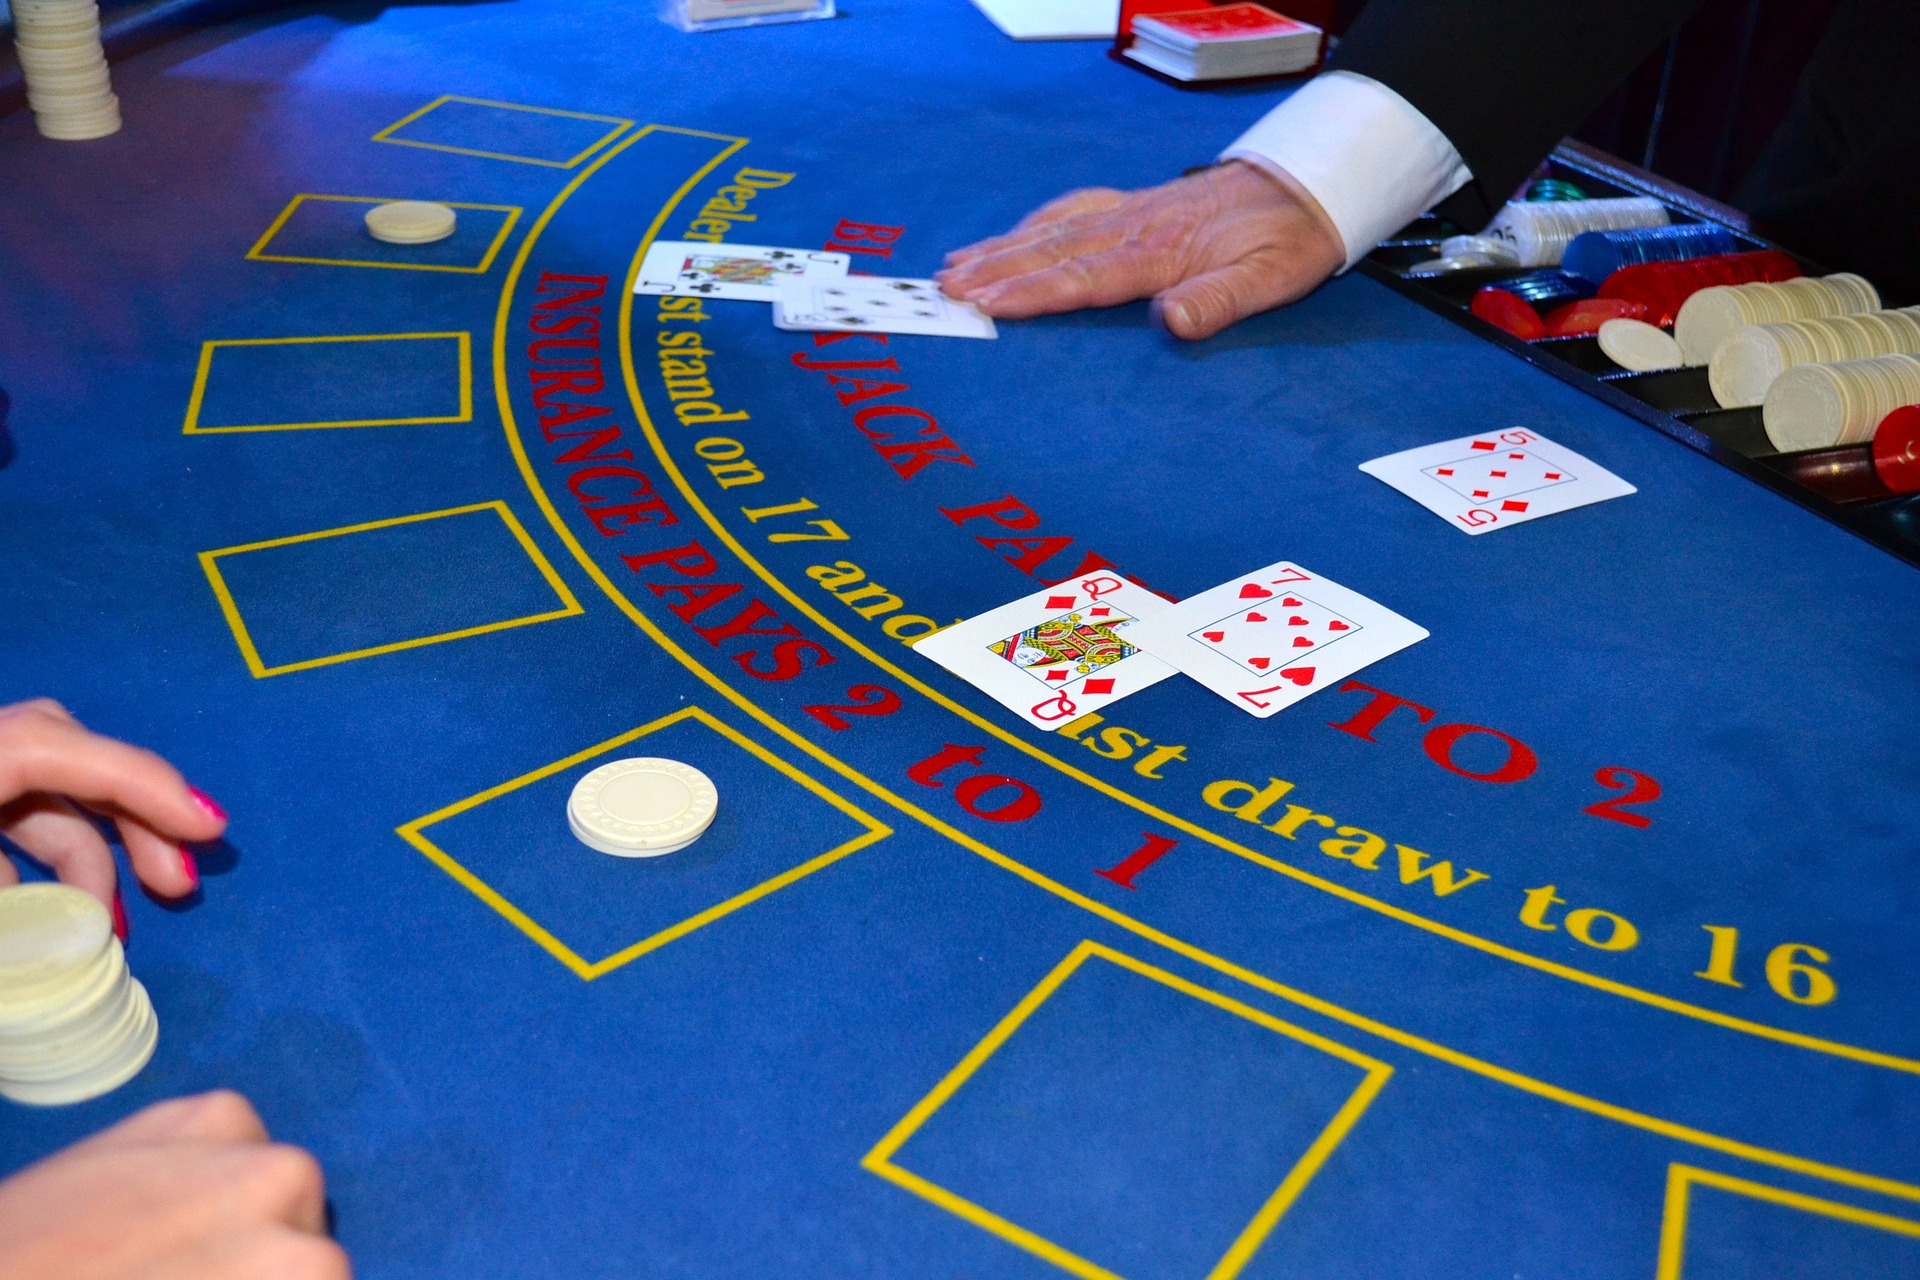 How to Play Blackjack on a Cruise Ship